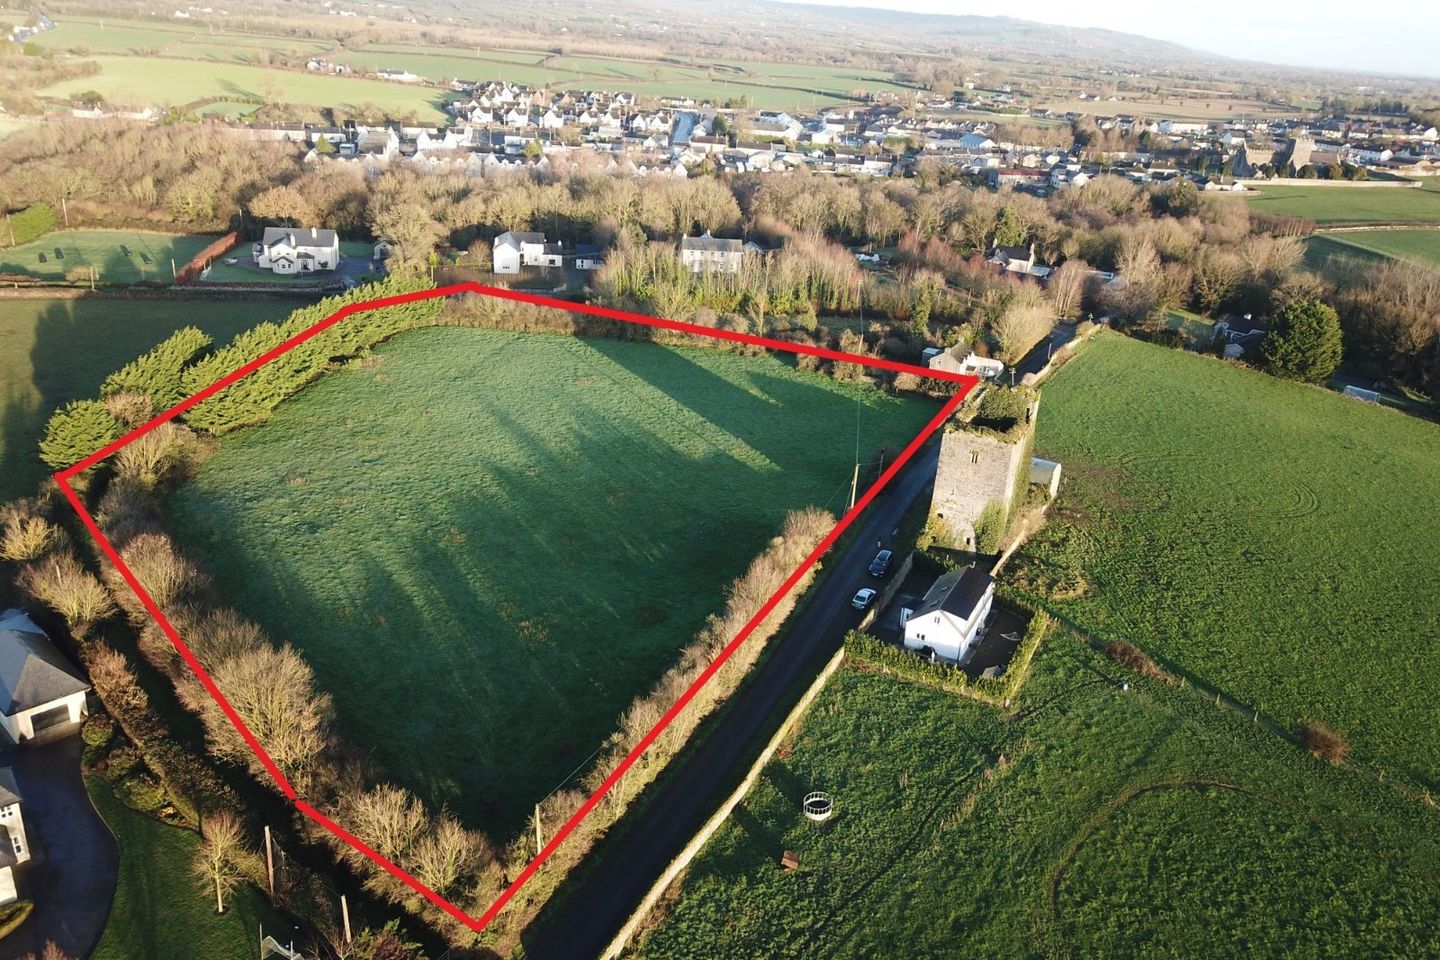 C. 3.06 Acres Of Land, C. 3.06 Acres Of Land, Mill Road, Gowran, Co. Kilkenny